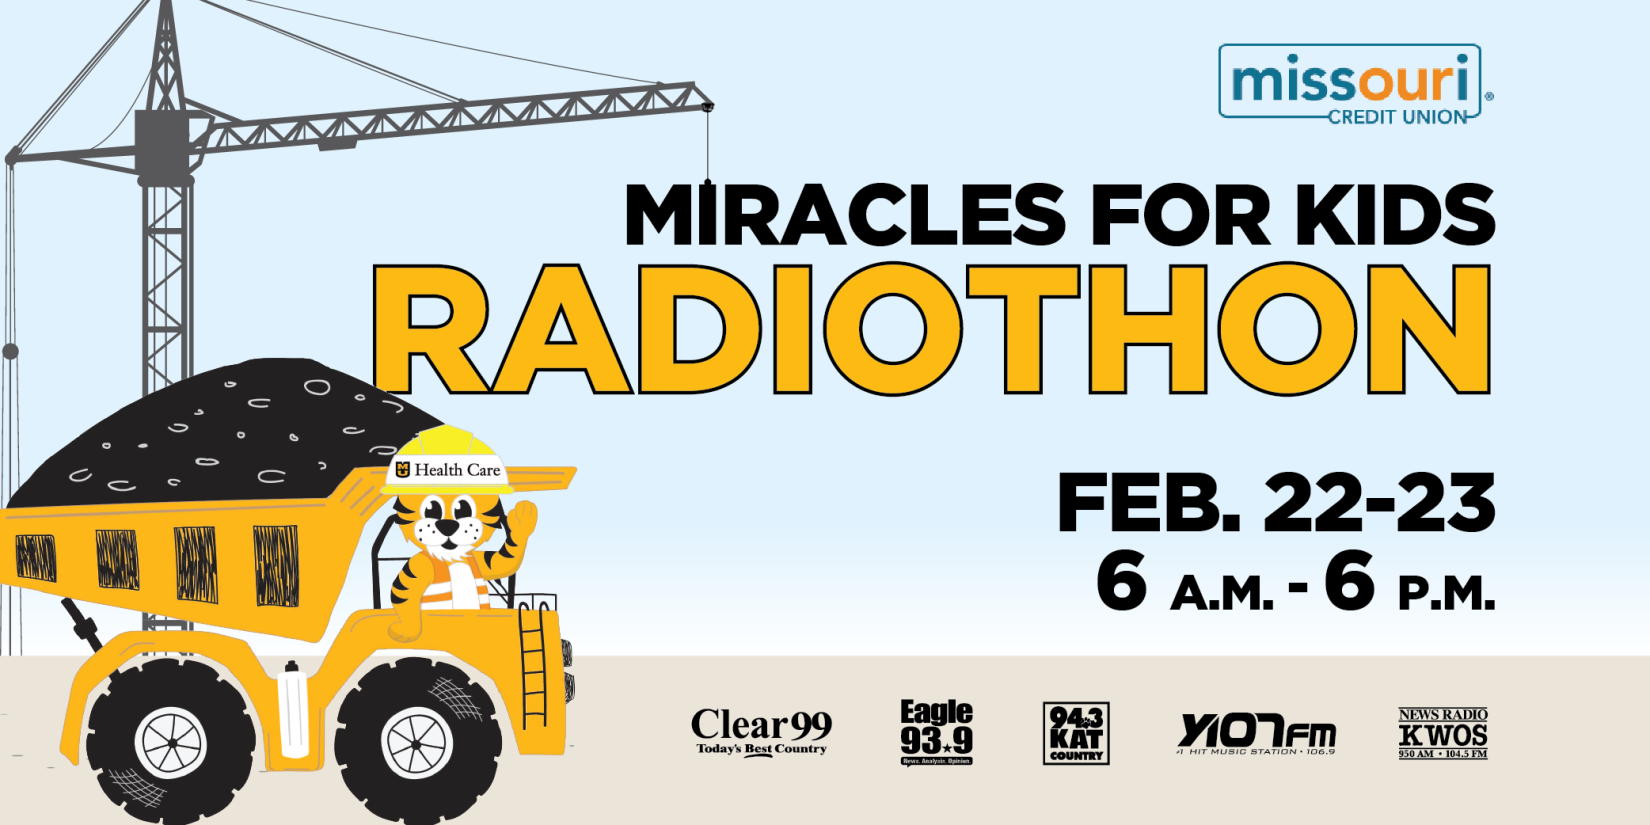 Tomorrow and Friday are opportunities for you to donate to help children at MU Health Care’s Children’s hospital